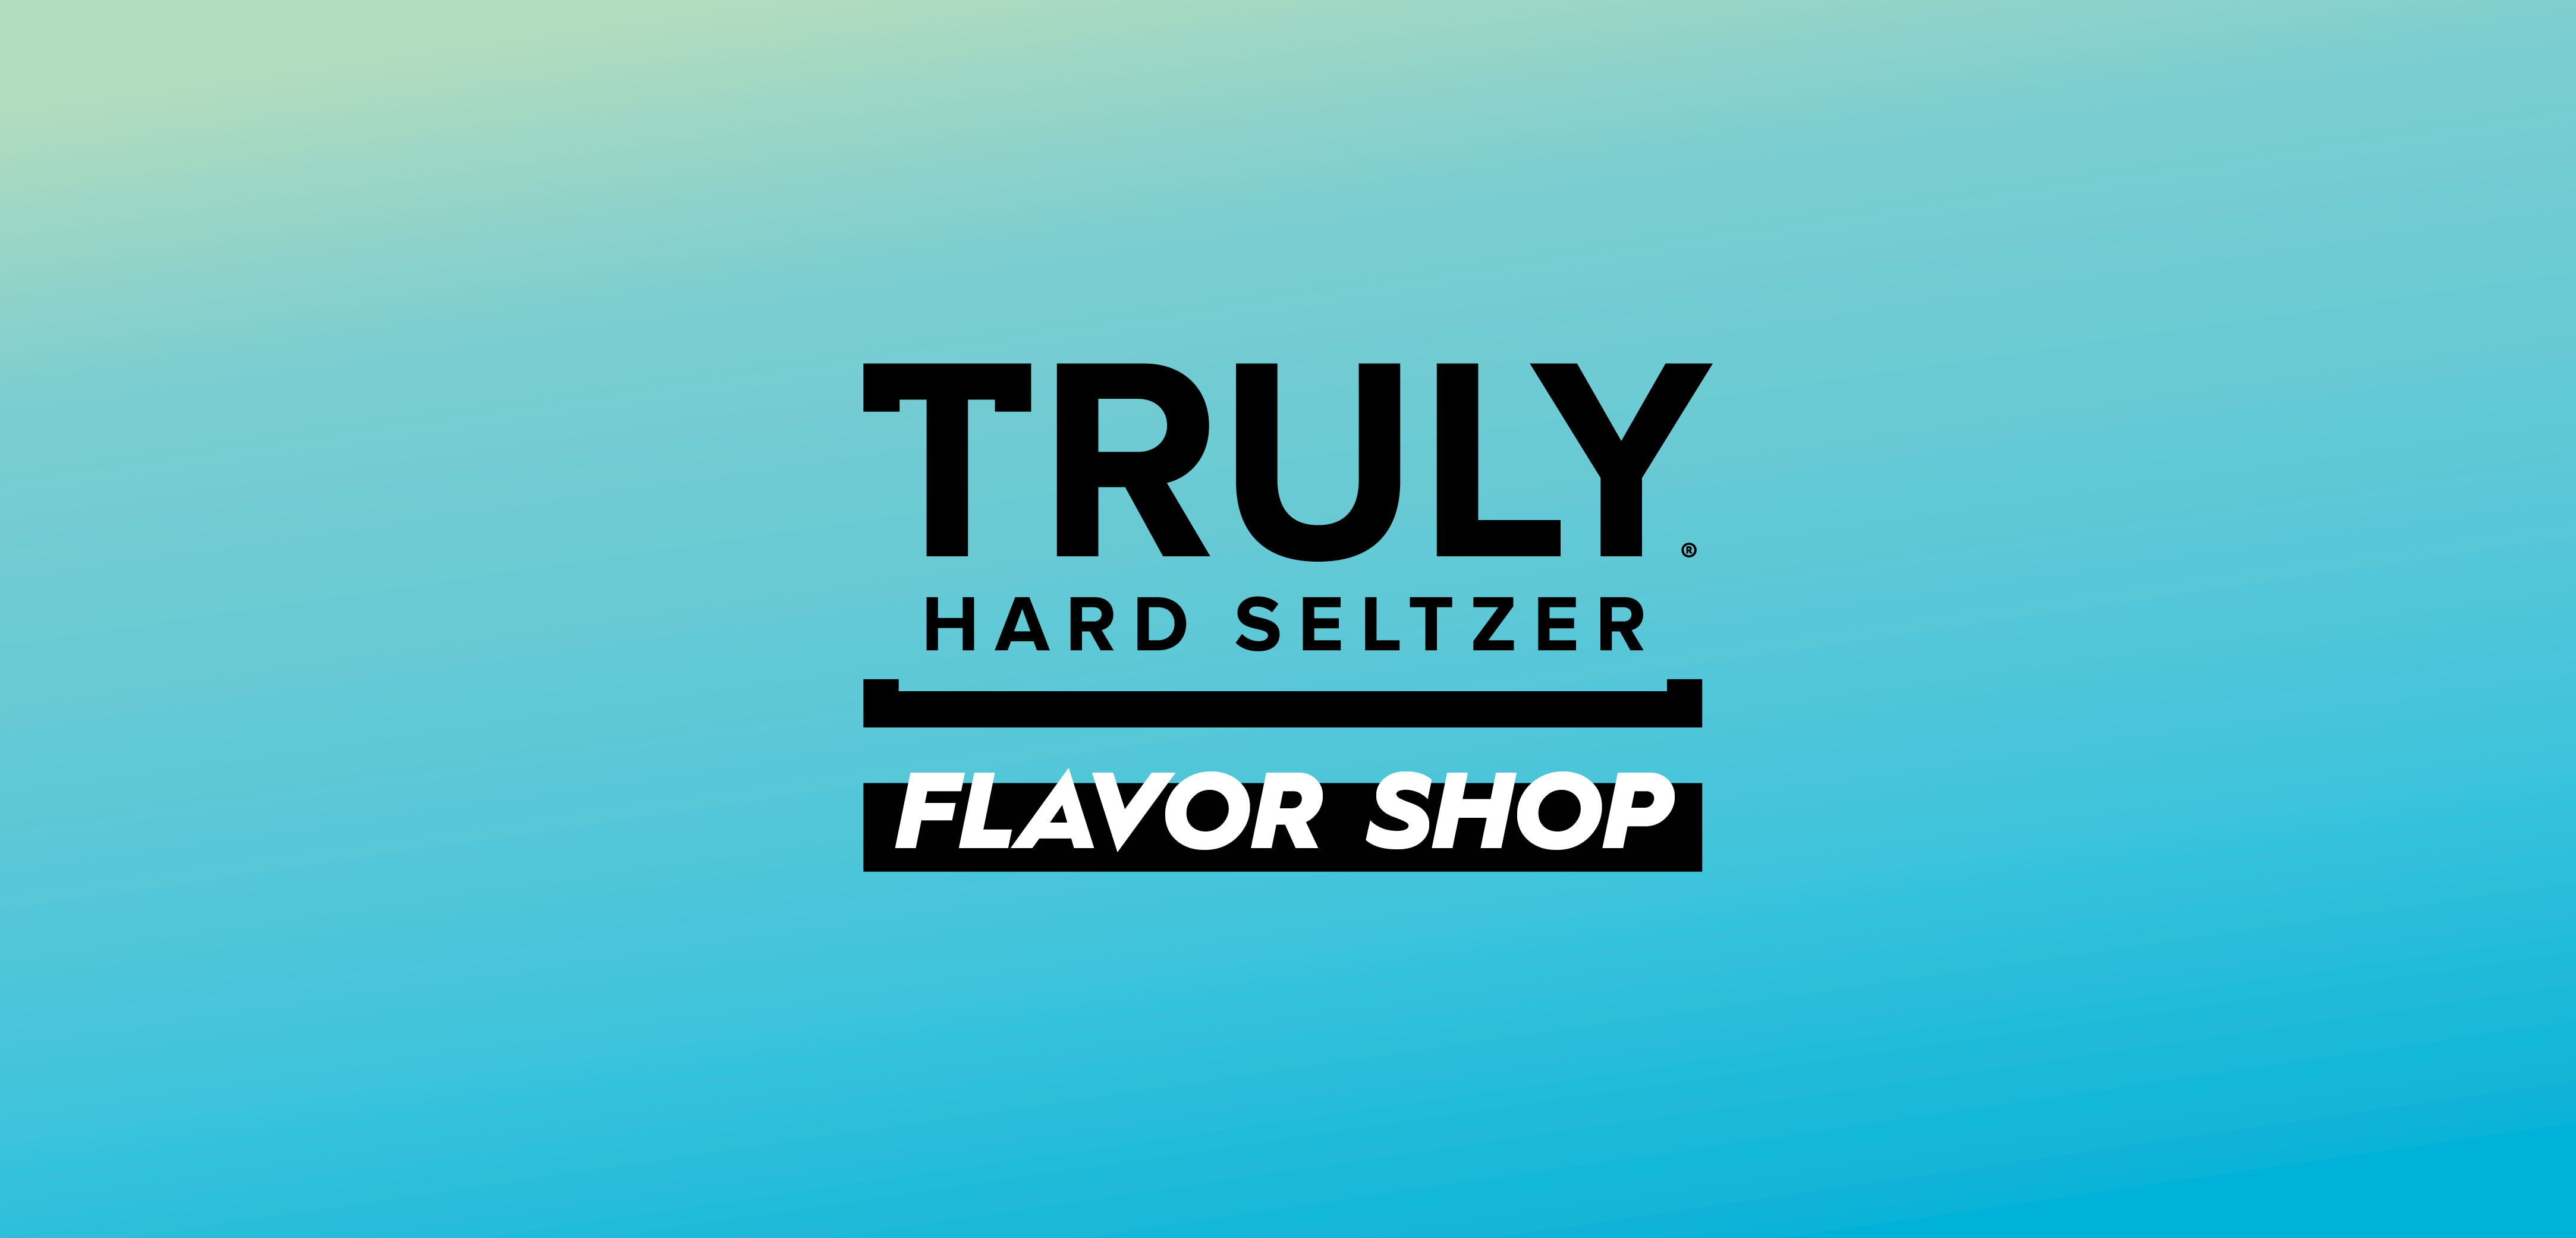 Truly Flavor Shop | Truly Hard Seltzer